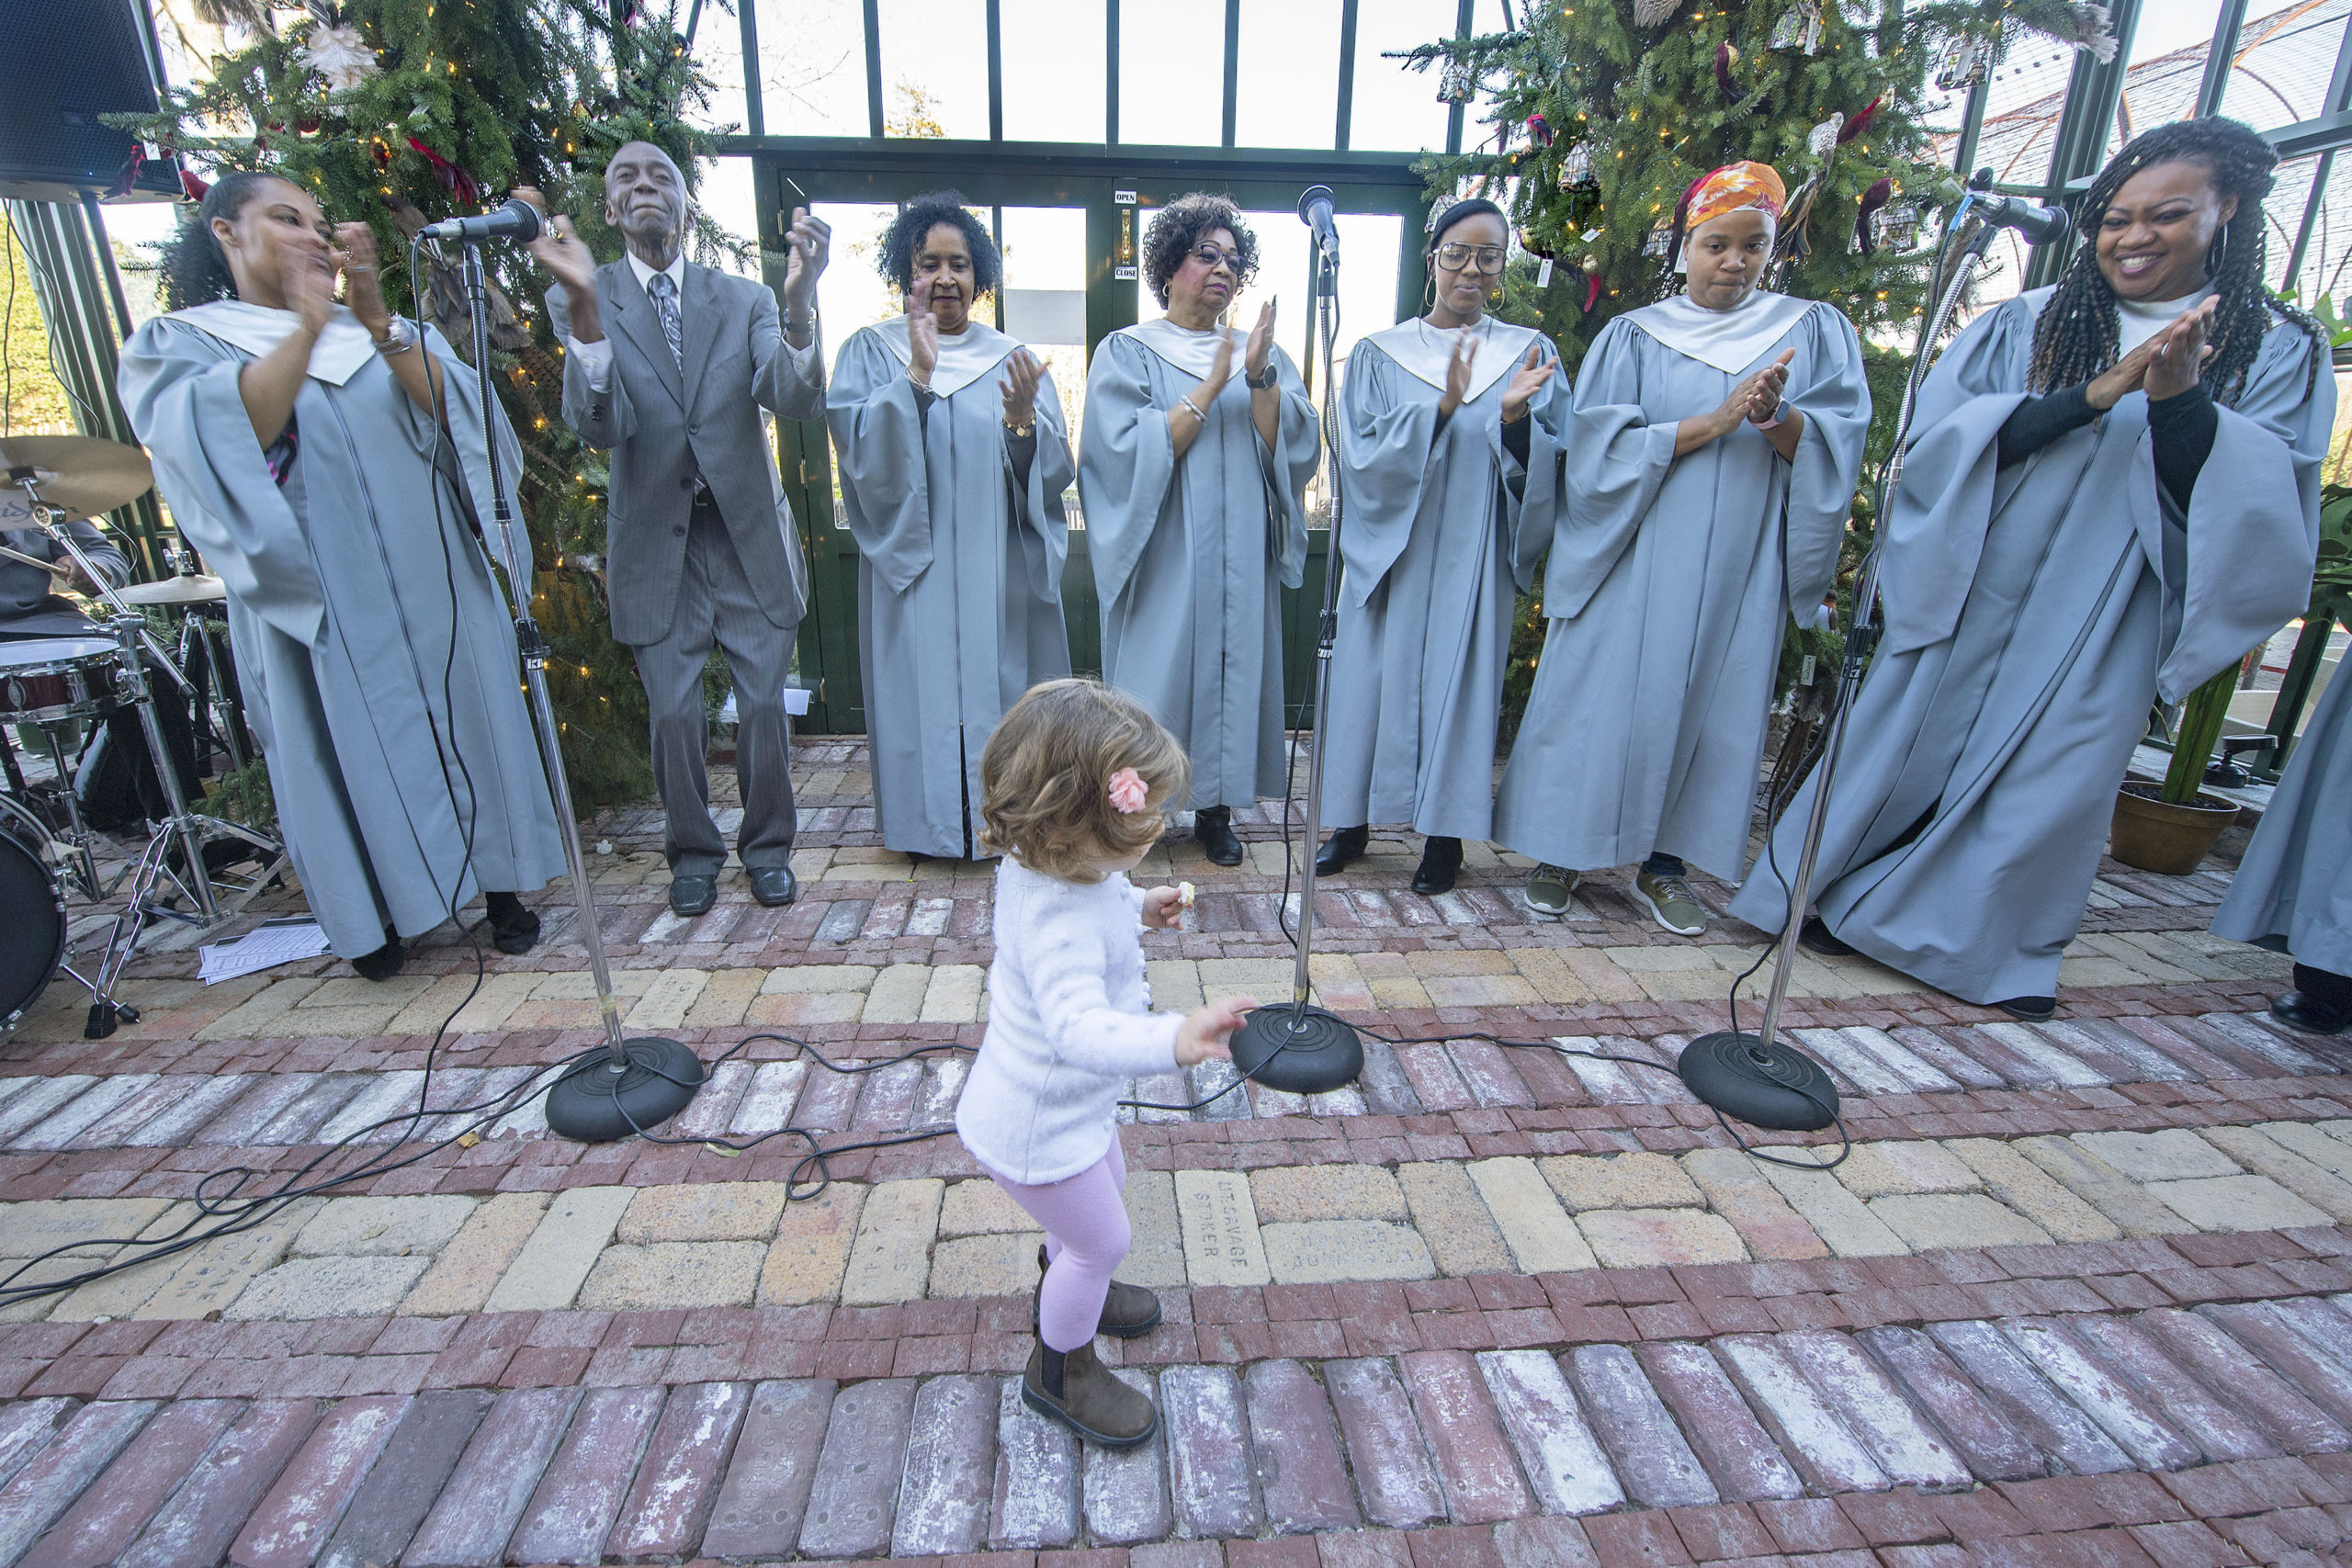 Eighteen-month-old Taylor Rader rocks out as the Genesis Ensemble of the First Baptist Church of Bridgehampton performed a Gospel 